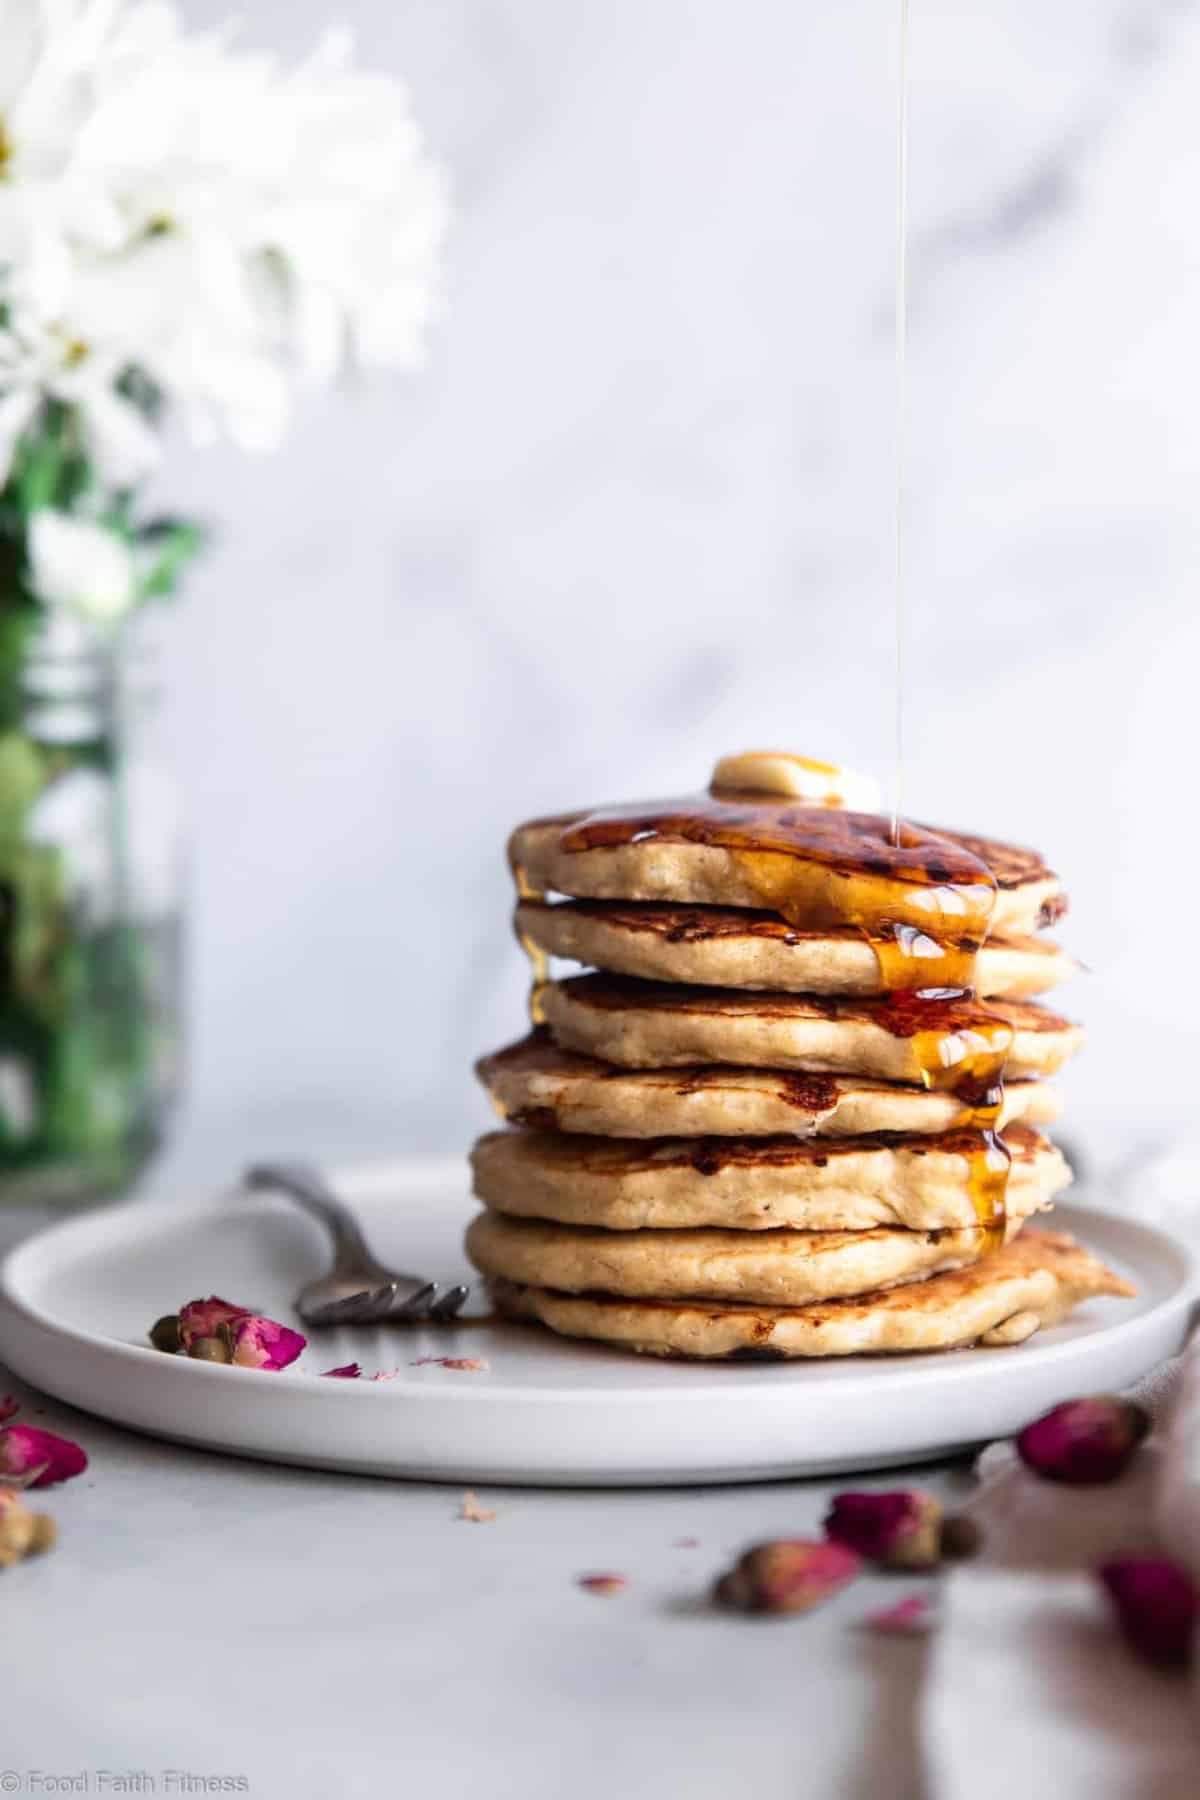 Fluffy Cottage Cheese Pancakes - These easy pancakes naturally gluten free and protein packed! Make them ahead for healthy breakfasts or make them on weekends! Great for kids and adults. | #Foodfaithfitness | #Glutenfree #healthy #breakfast #pancakes